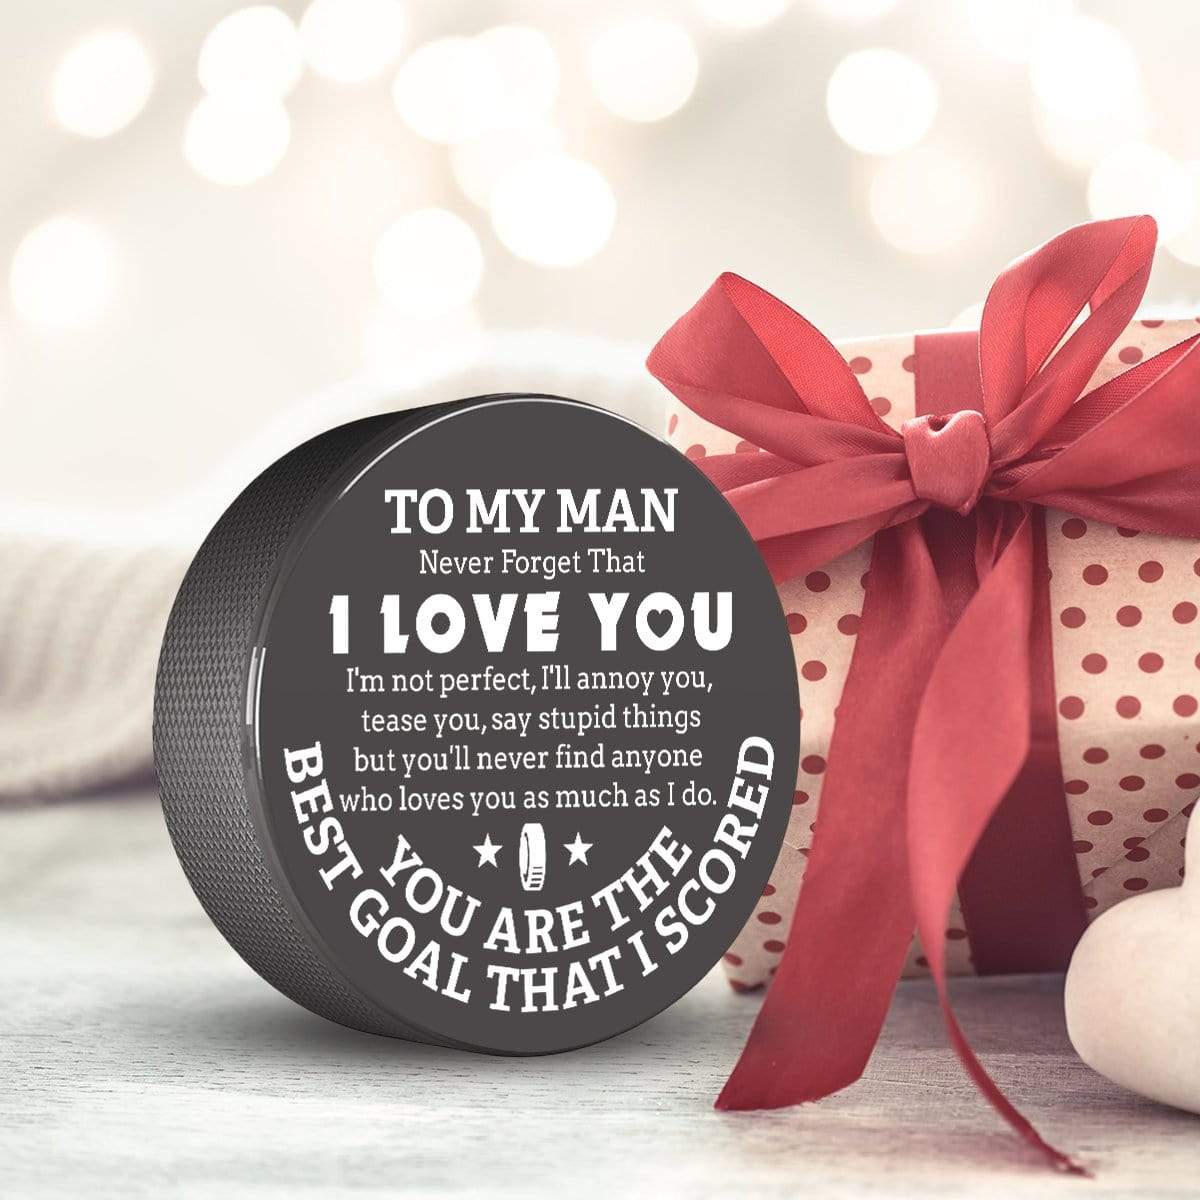 Hockey Puck - Hockey - To My Man - You'll Never Find Anyone Who Loves You As Much As I Do - Gai26012